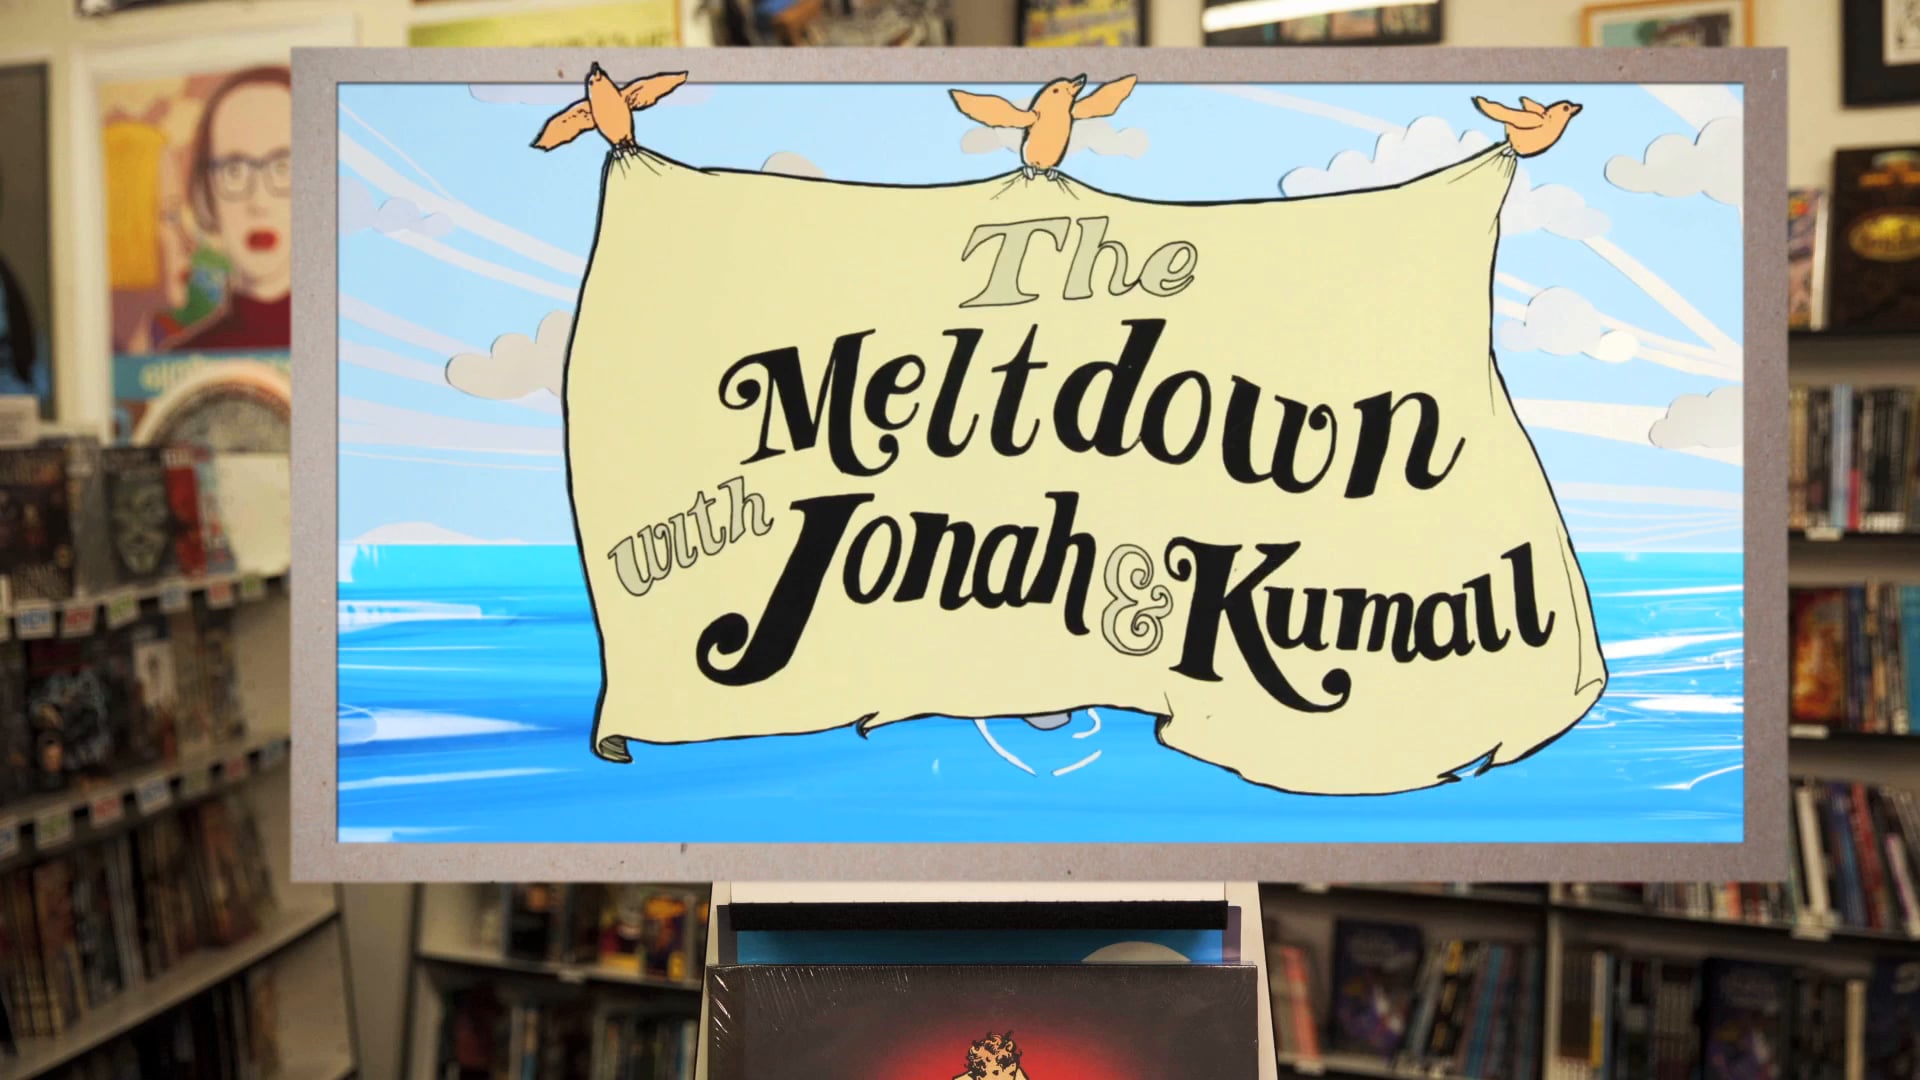 Comedy Central's The Meltdown with Jonah & Kumail